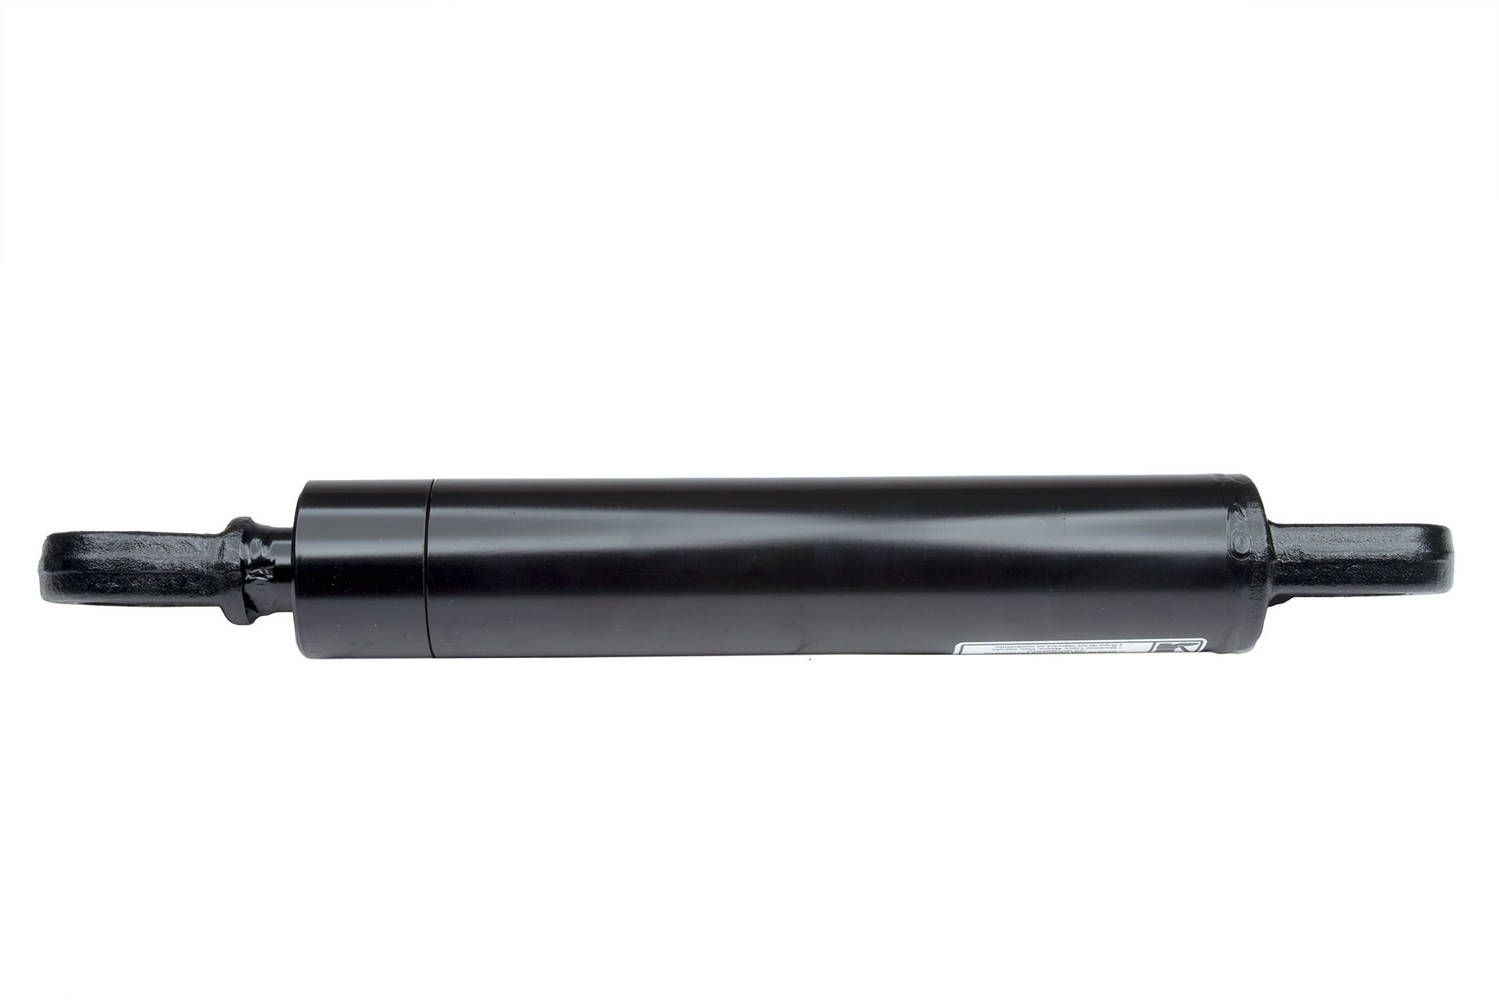 CHIEF WTG WELDED TANG HYDRAULIC CYLINDER: 4" BORE X 30" STROKE - 2" ROD